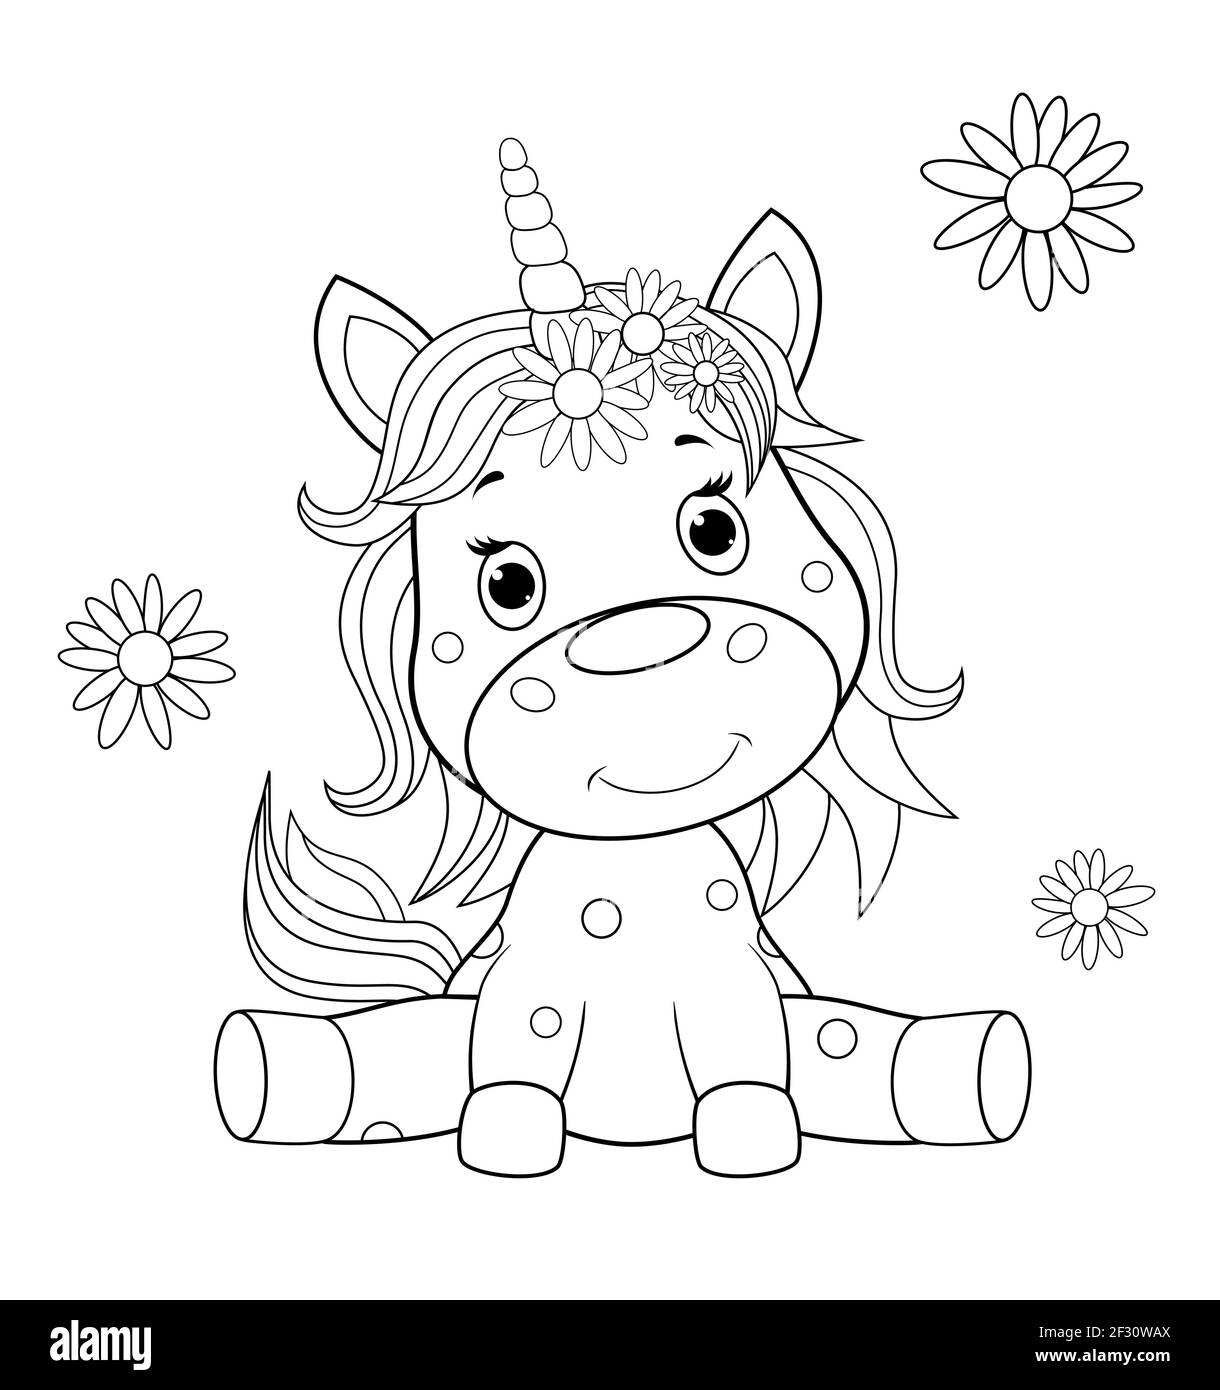 A small sitting unicorn is drawn in black contour lines for children's coloring. Unicorn baby on a white background. Stock Vector